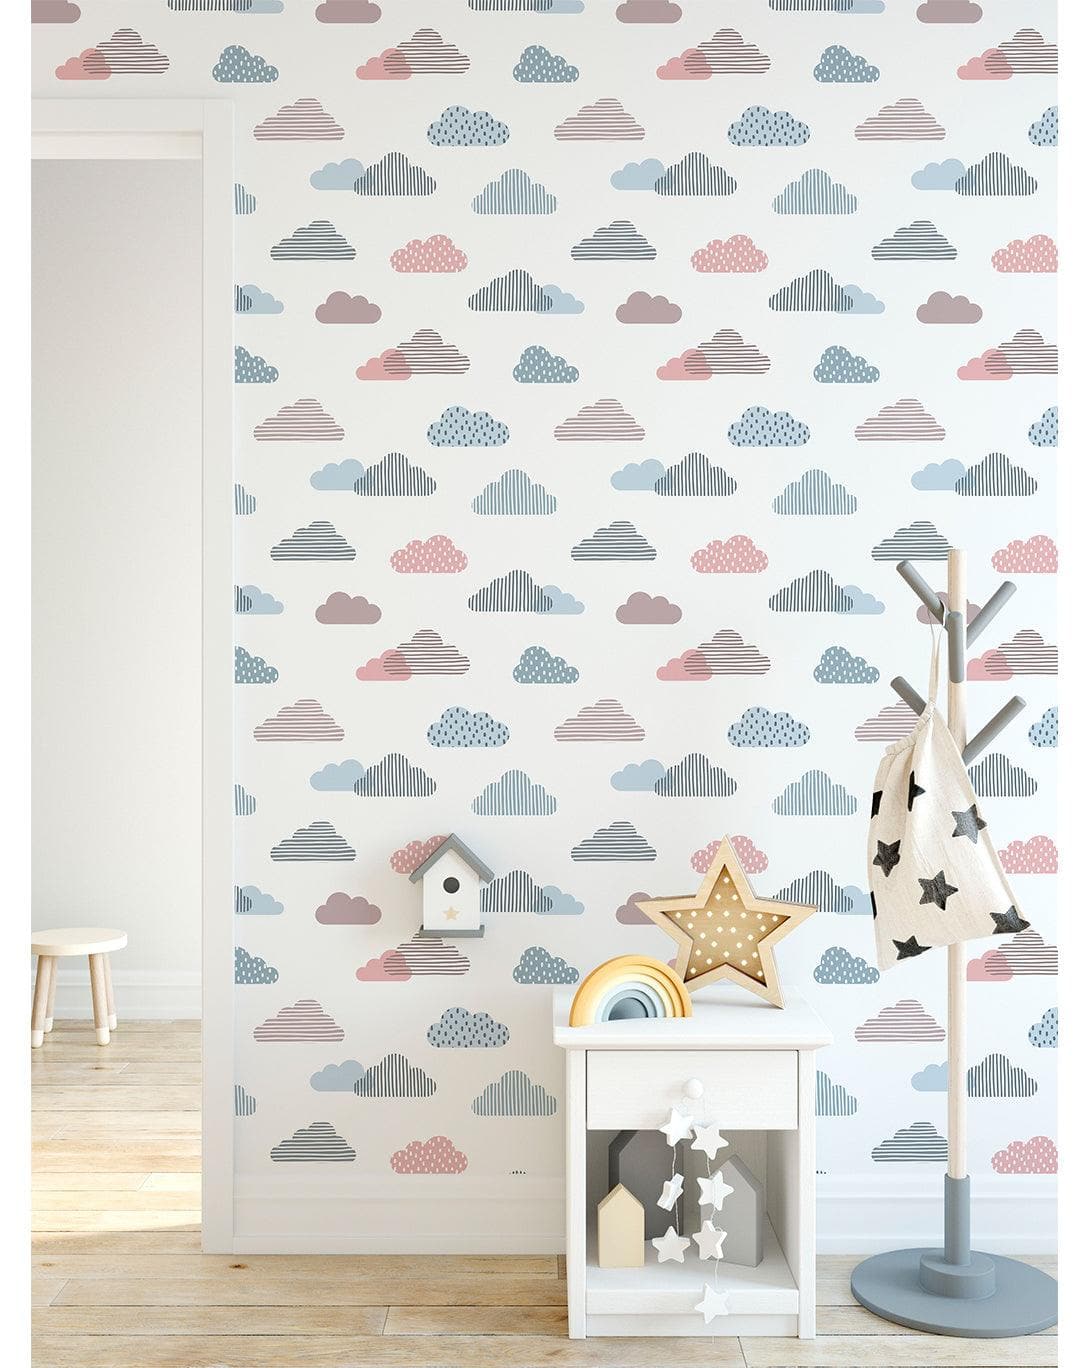 Colorful Geometric Clouds Removable Wallpaper 